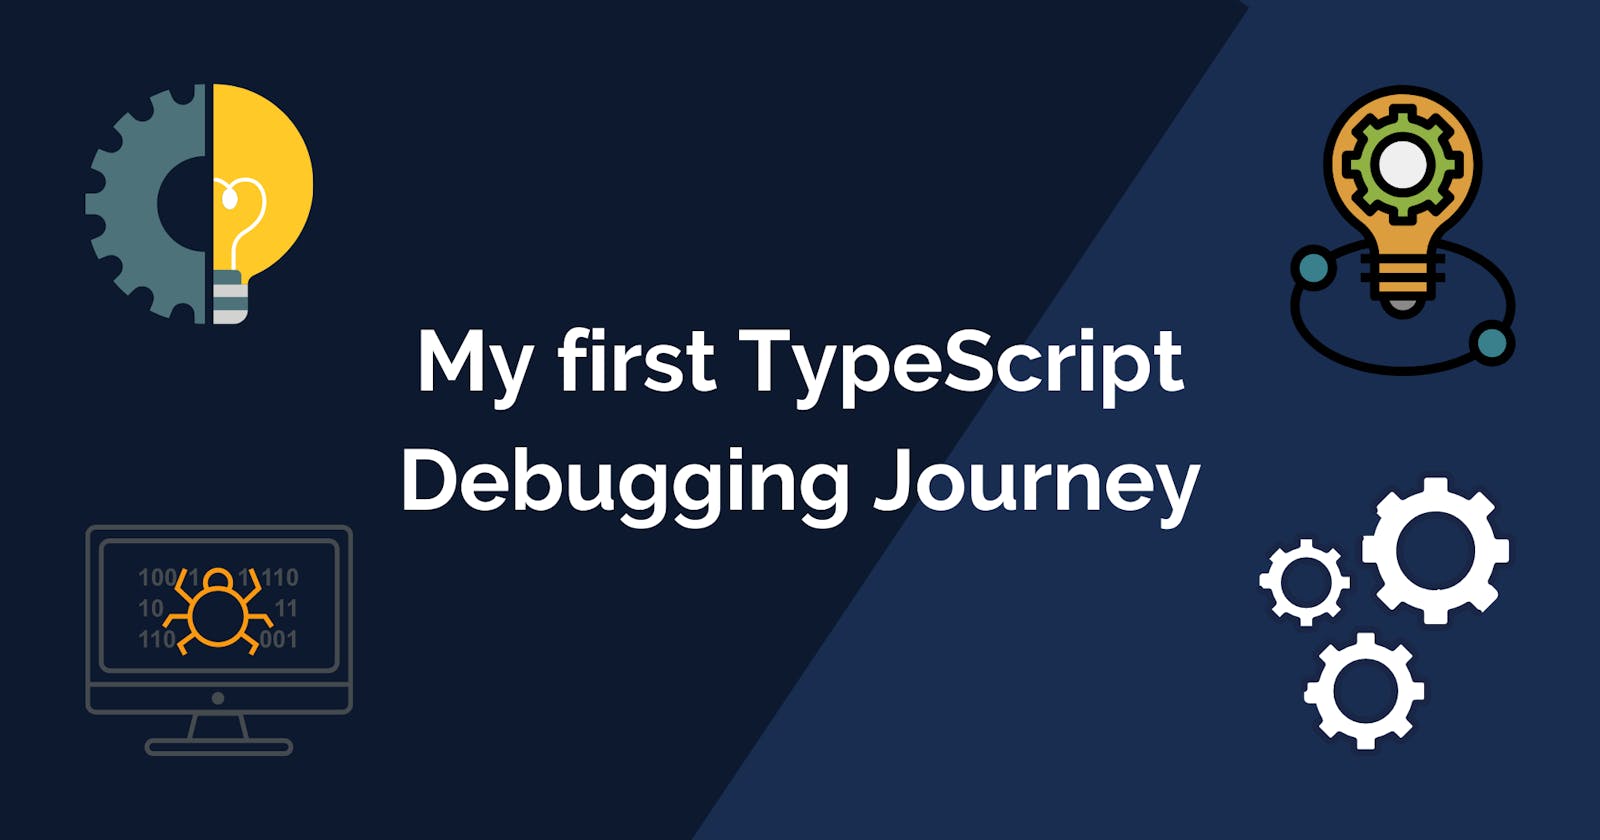 My first TypeScript Debugging Journey